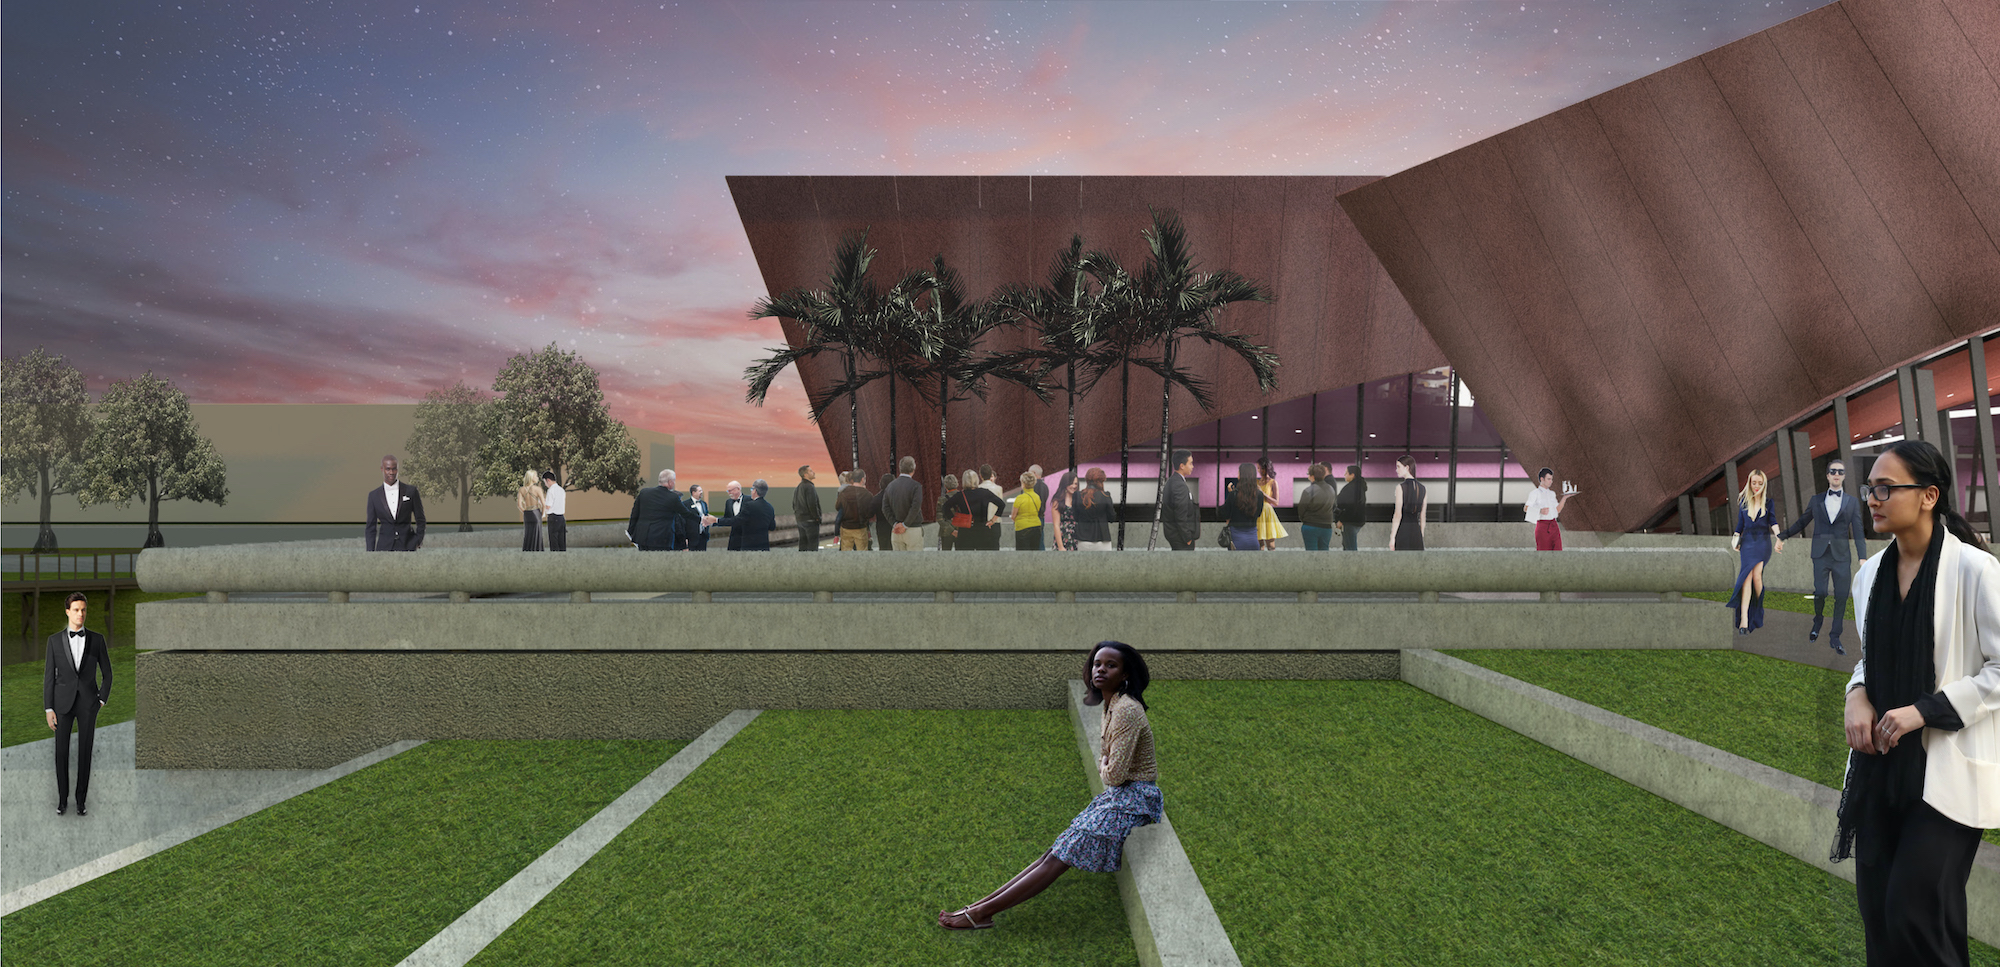 Rendering shows a mock-up of the new WInter Park Events Center with dark down and red brick and a green space with people.